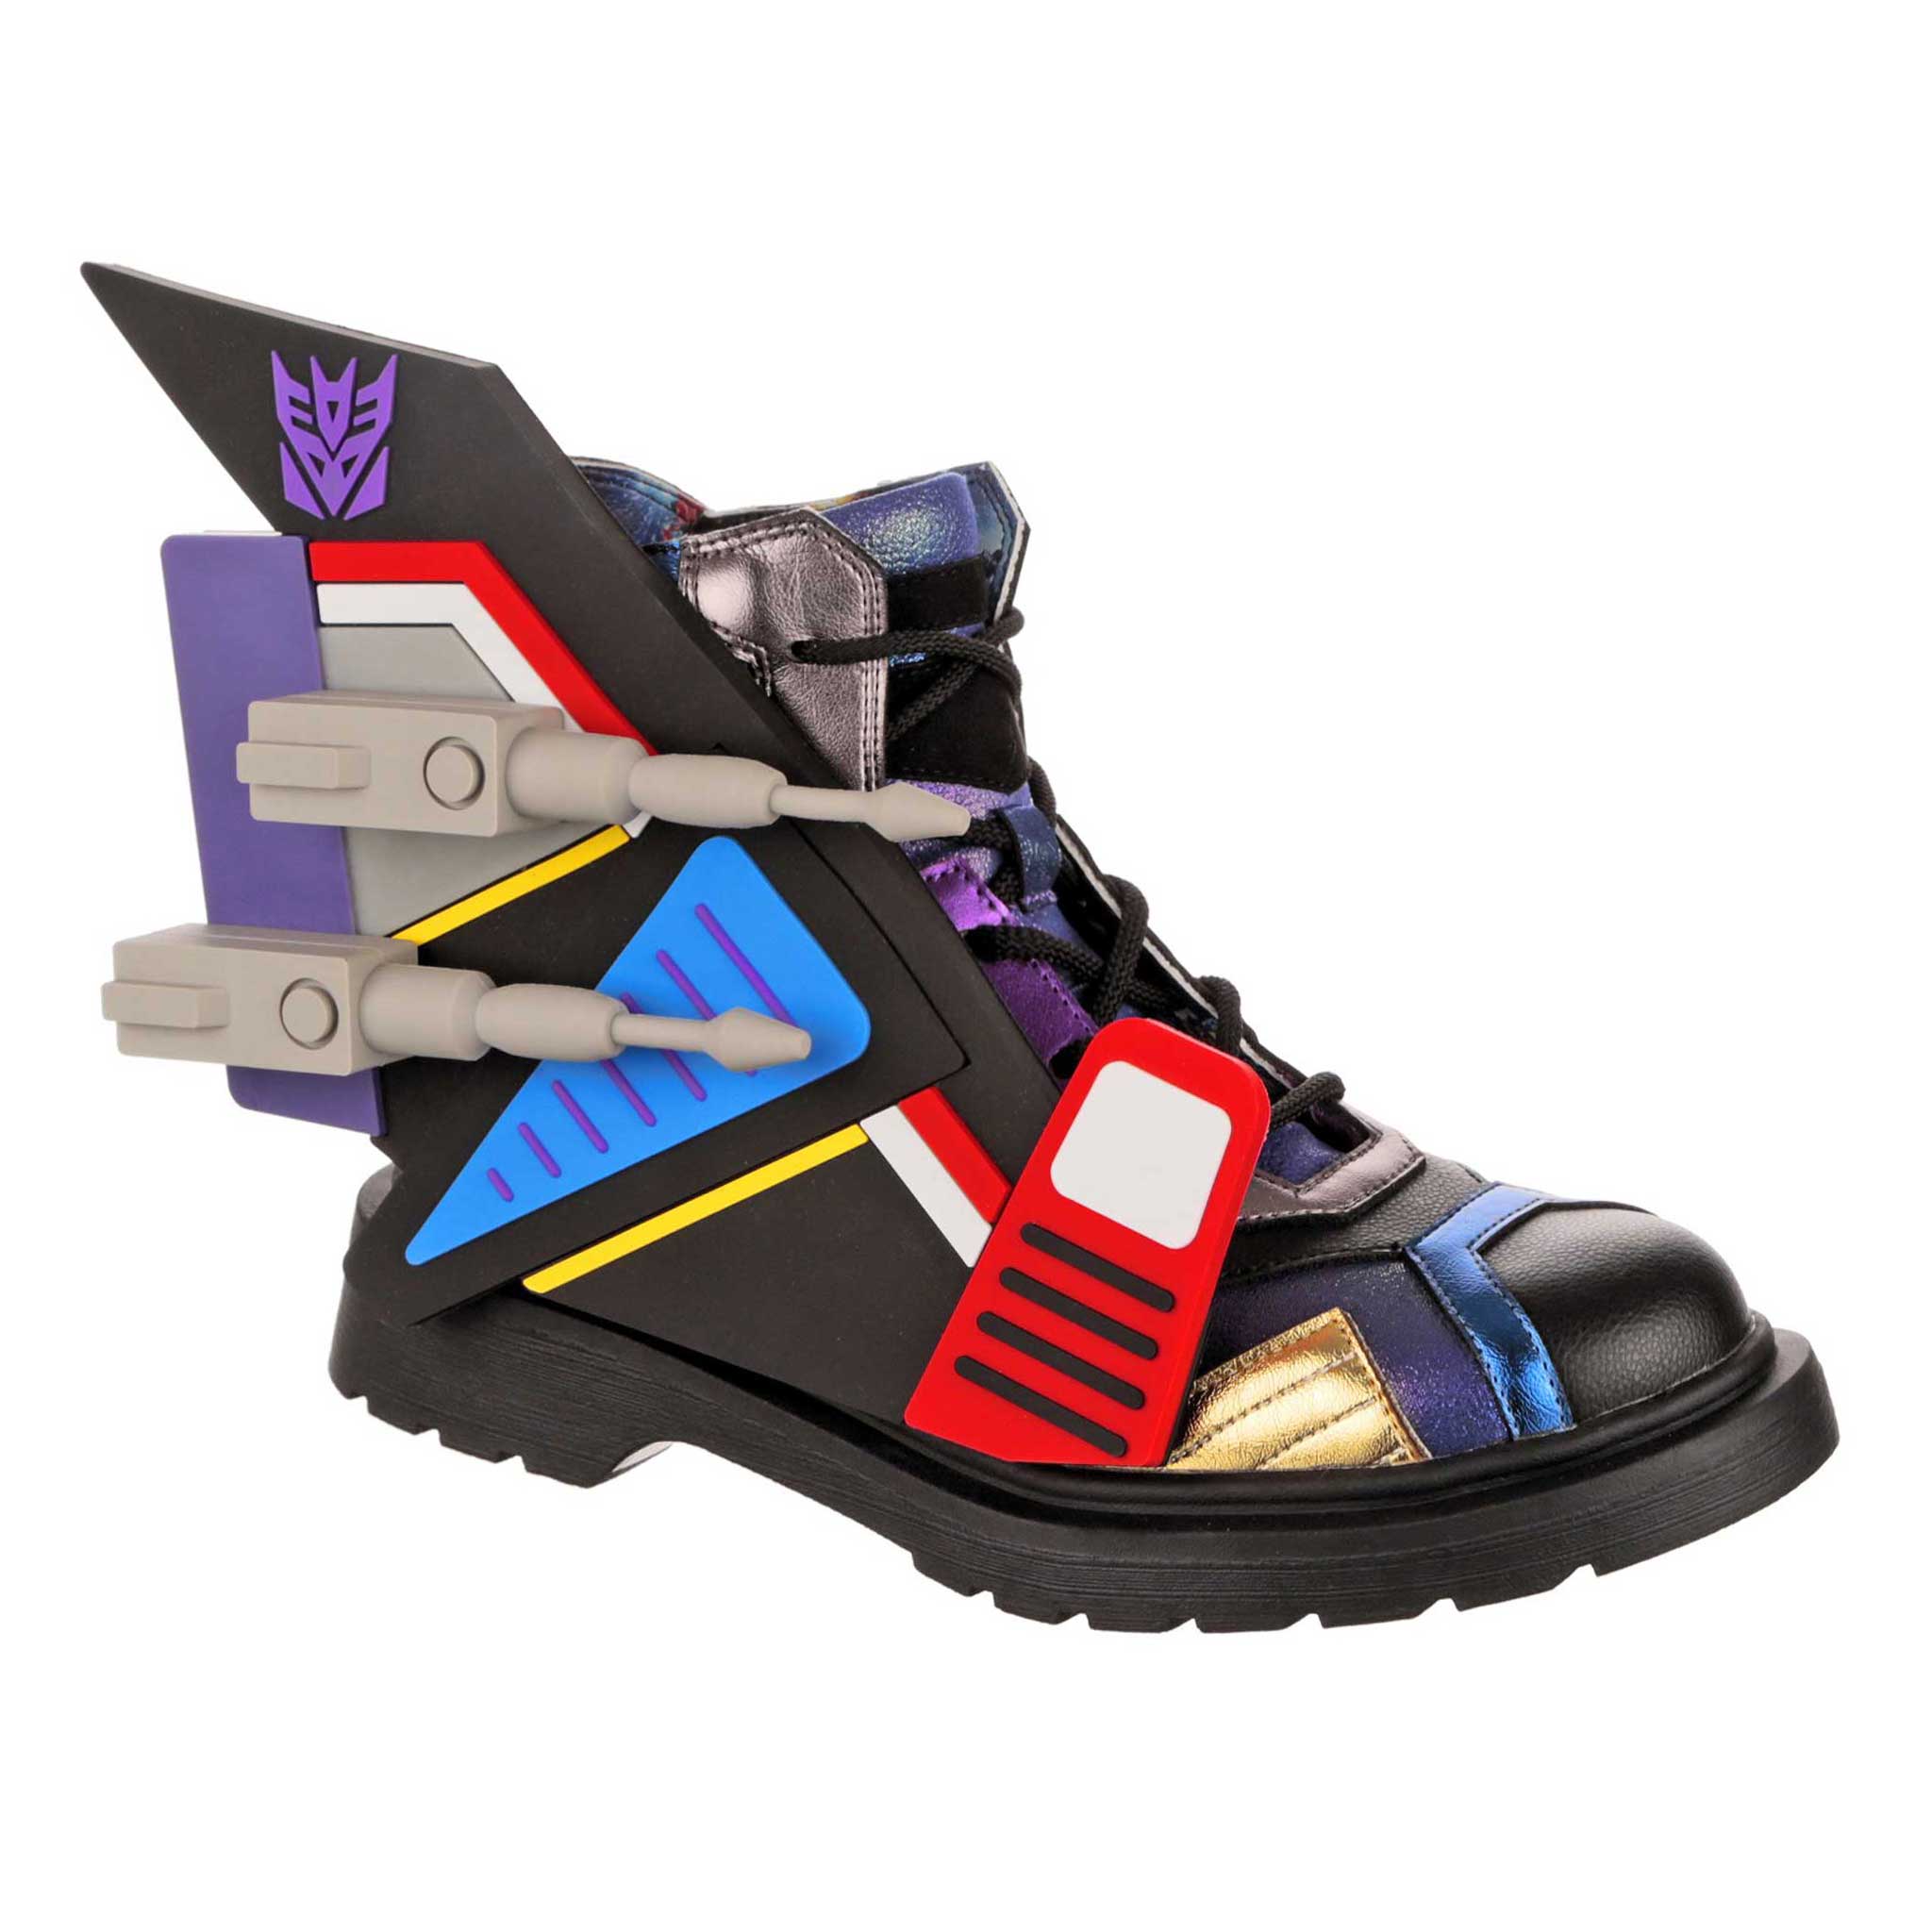 Transformers-themed black lace up ankle boots with black laces, and chunky black details. Removable grey jet wings sit on the side of the lace-up boots. A purple Decepticon logo sit on the side of the black ankle boots, finished off with a white chunky sole.